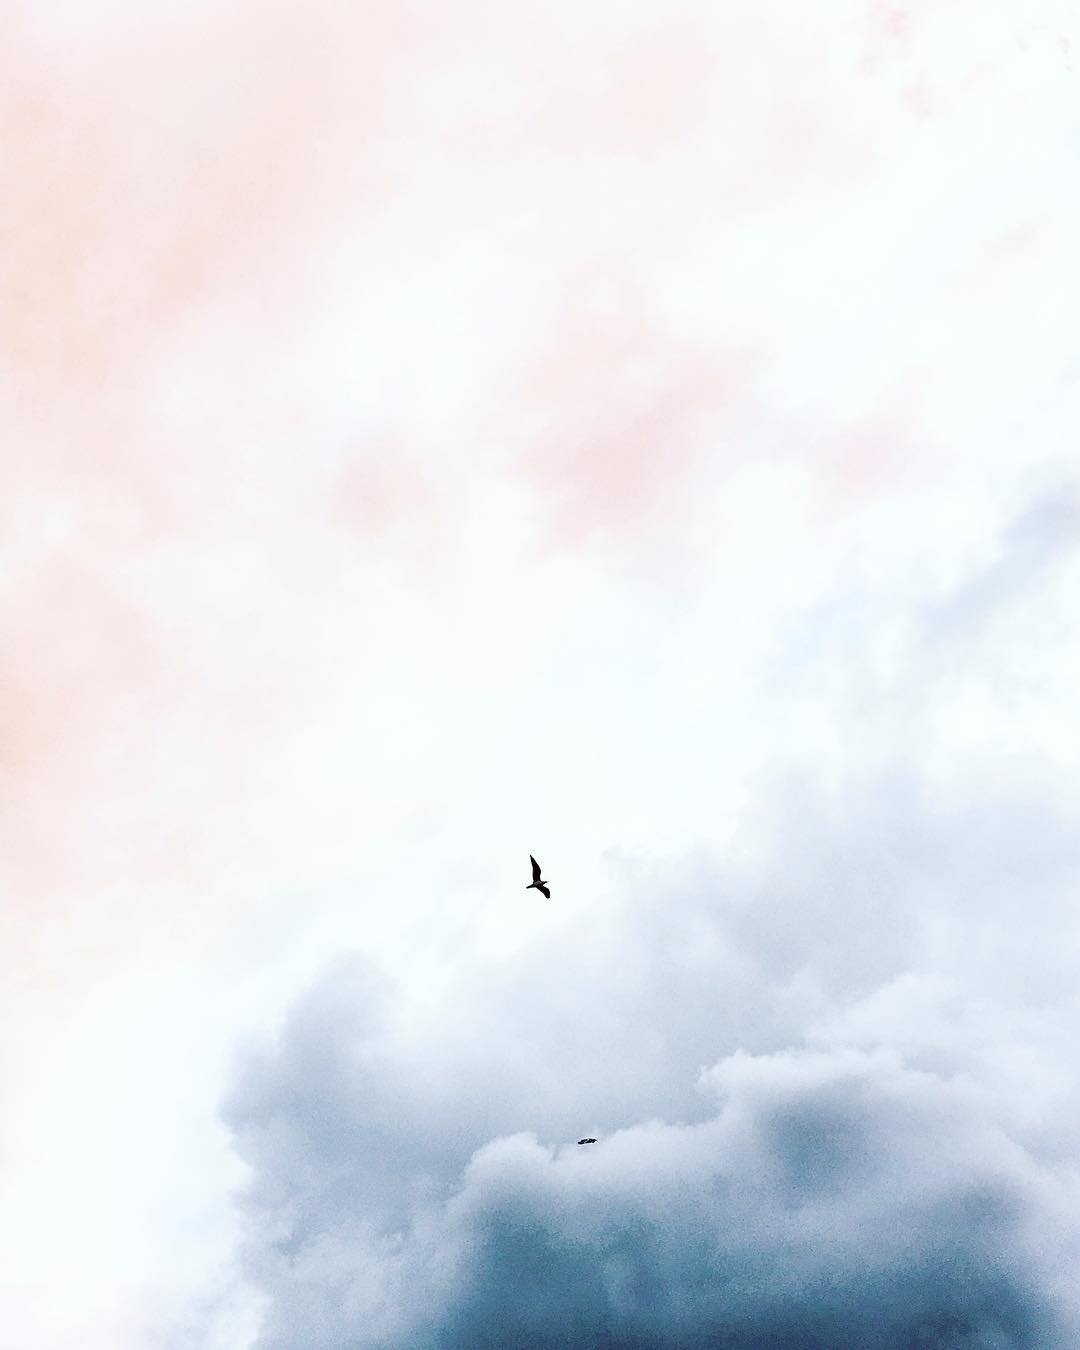 Birdies in the sky. Gratitude! Thank you so much for your first orders in my new print shop! Very. Very. Very. Grateful. ✨
⠀⠀⠀⠀⠀
⠀⠀⠀⠀⠀⠀⠀⠀⠀
⠀⠀⠀⠀⠀ ⠀⠀⠀⠀⠀
⠀⠀⠀⠀⠀⠀⠀⠀⠀
⠀⠀⠀⠀⠀⠀⠀⠀⠀
#byronbay #outside_project #earth #captureyourcreativity #bdteam #agameoftones 